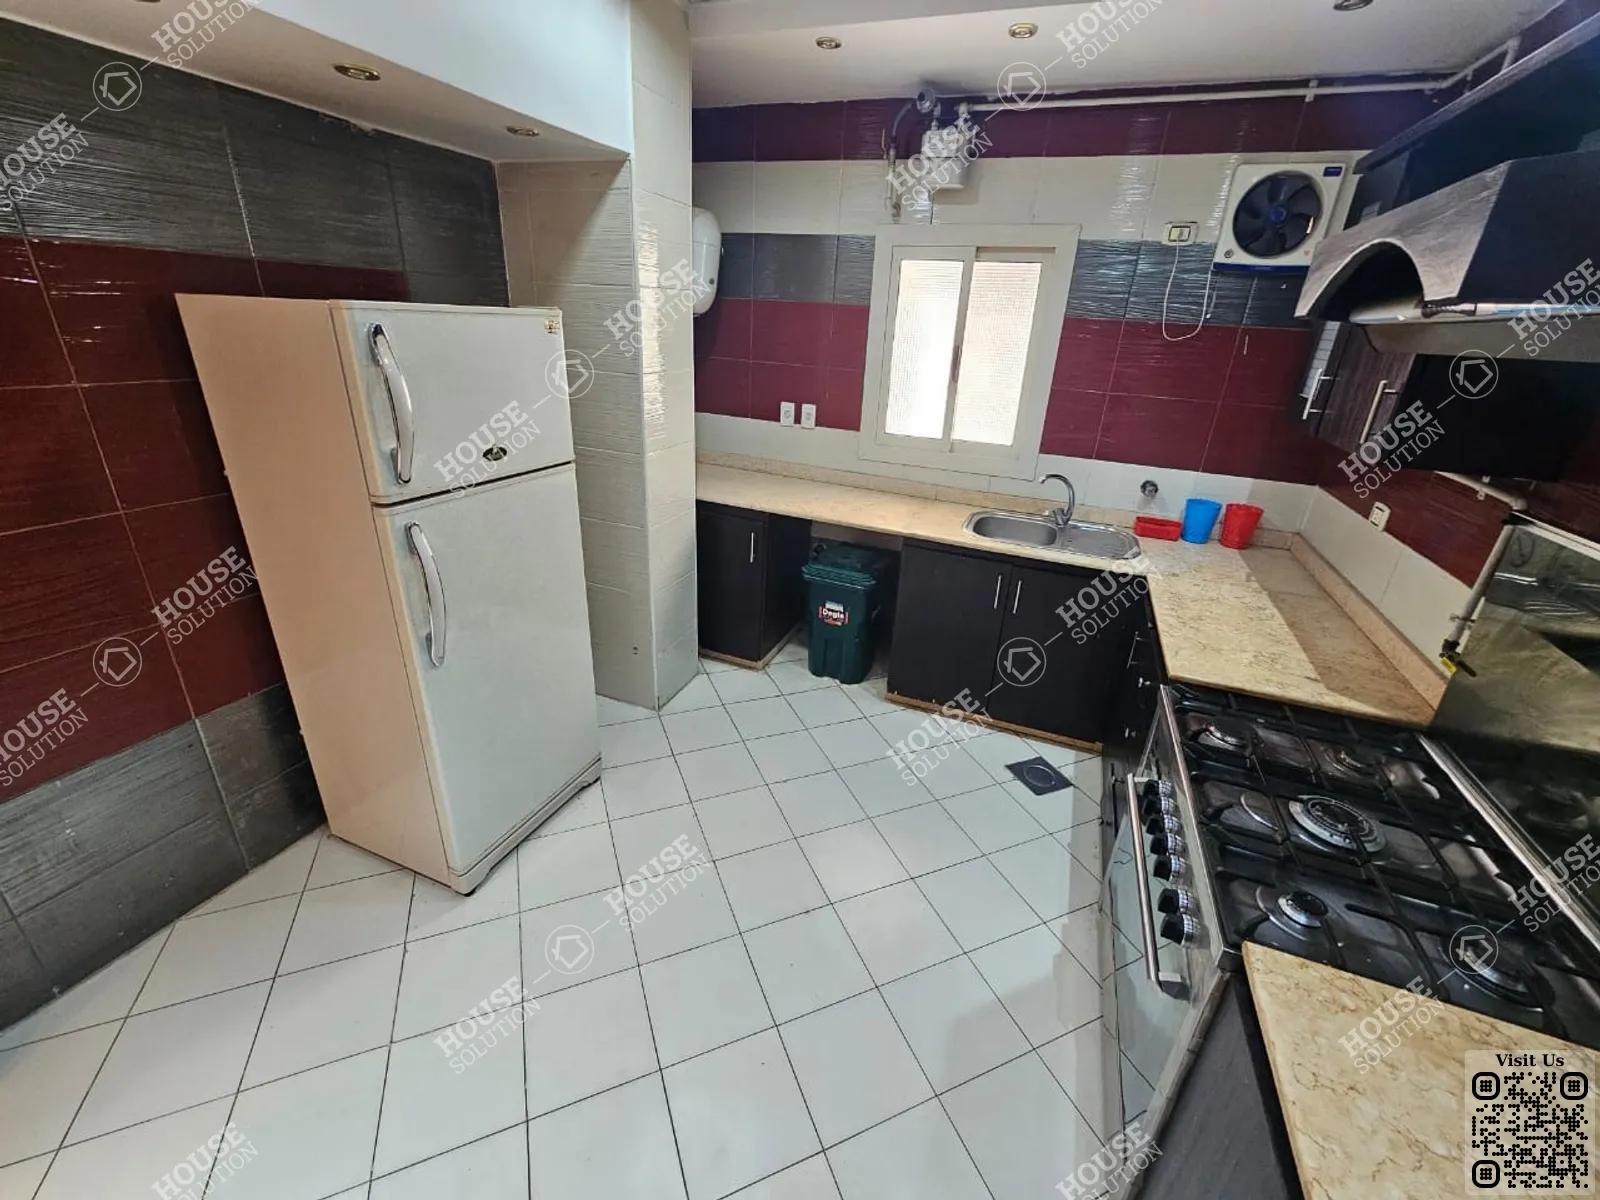 KITCHEN  @ Apartments For Rent In Maadi Maadi Degla Area: 180 m² consists of 3 Bedrooms 3 Bathrooms Furnished 5 stars #4968-2